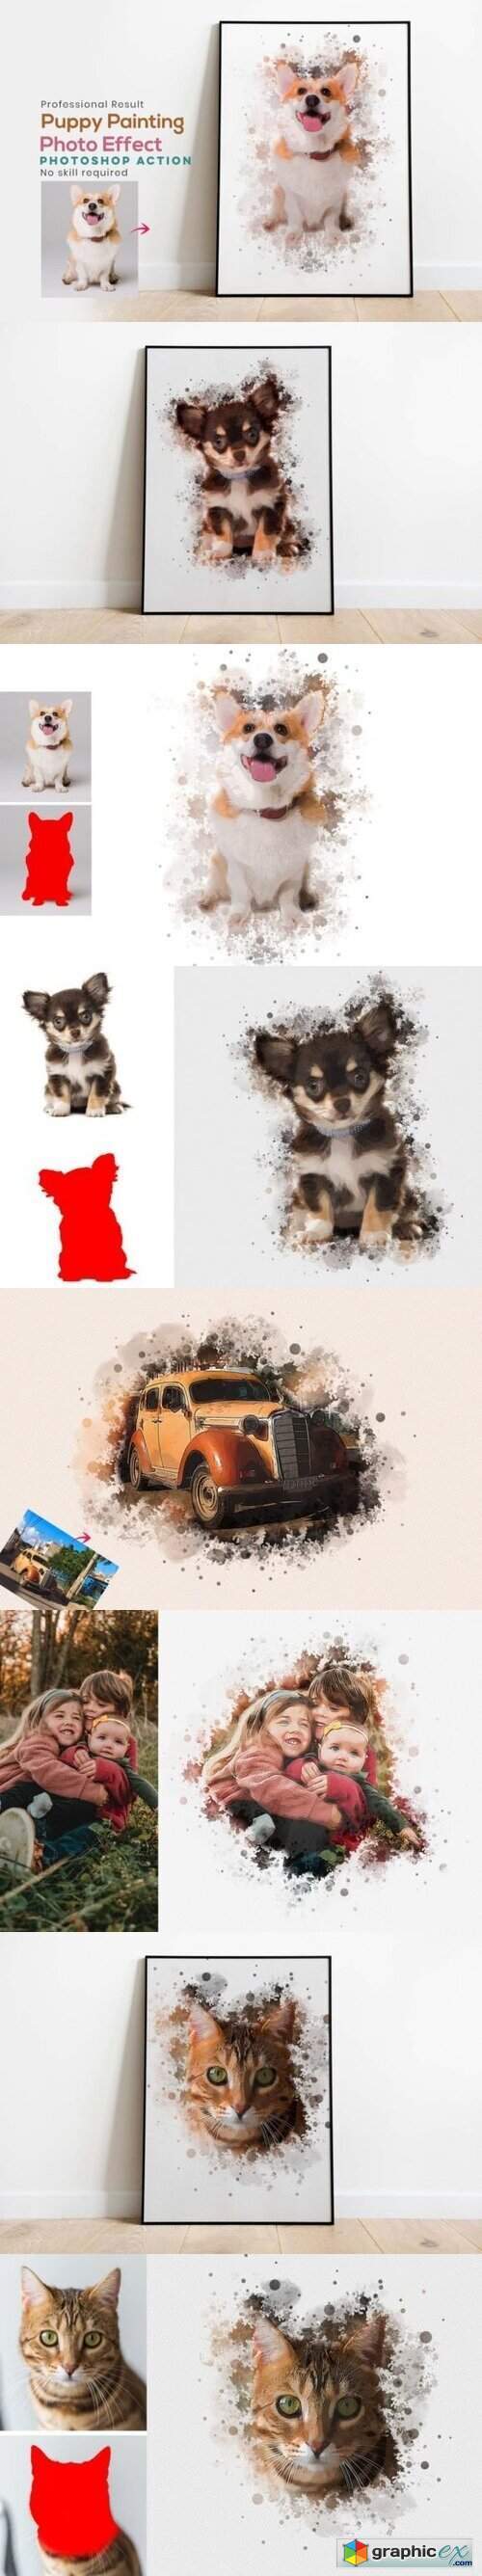 Puppy Painting Photoshop Action